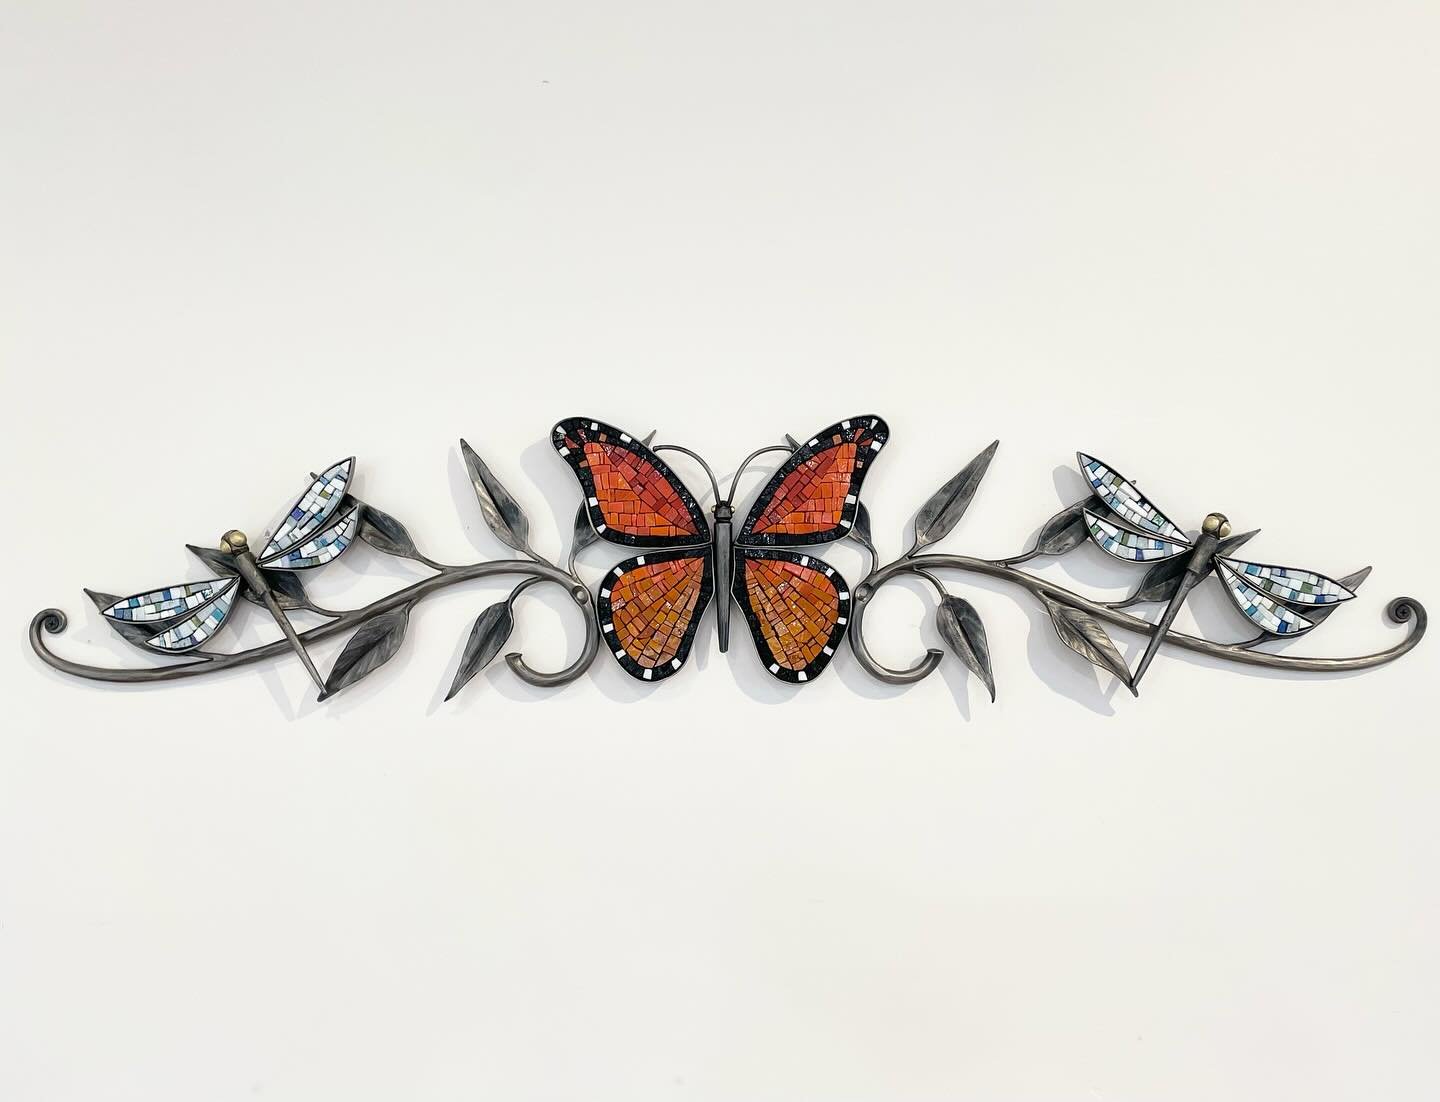 Glamour shots of the butterfly forged steel and mosaic collaborative wall sculpture in our studio before shipped it out. 💅🏻✨

Last slide shows the sculpture installed in its forever home. 🦋

We&rsquo;re having so much fun with this line of work! I